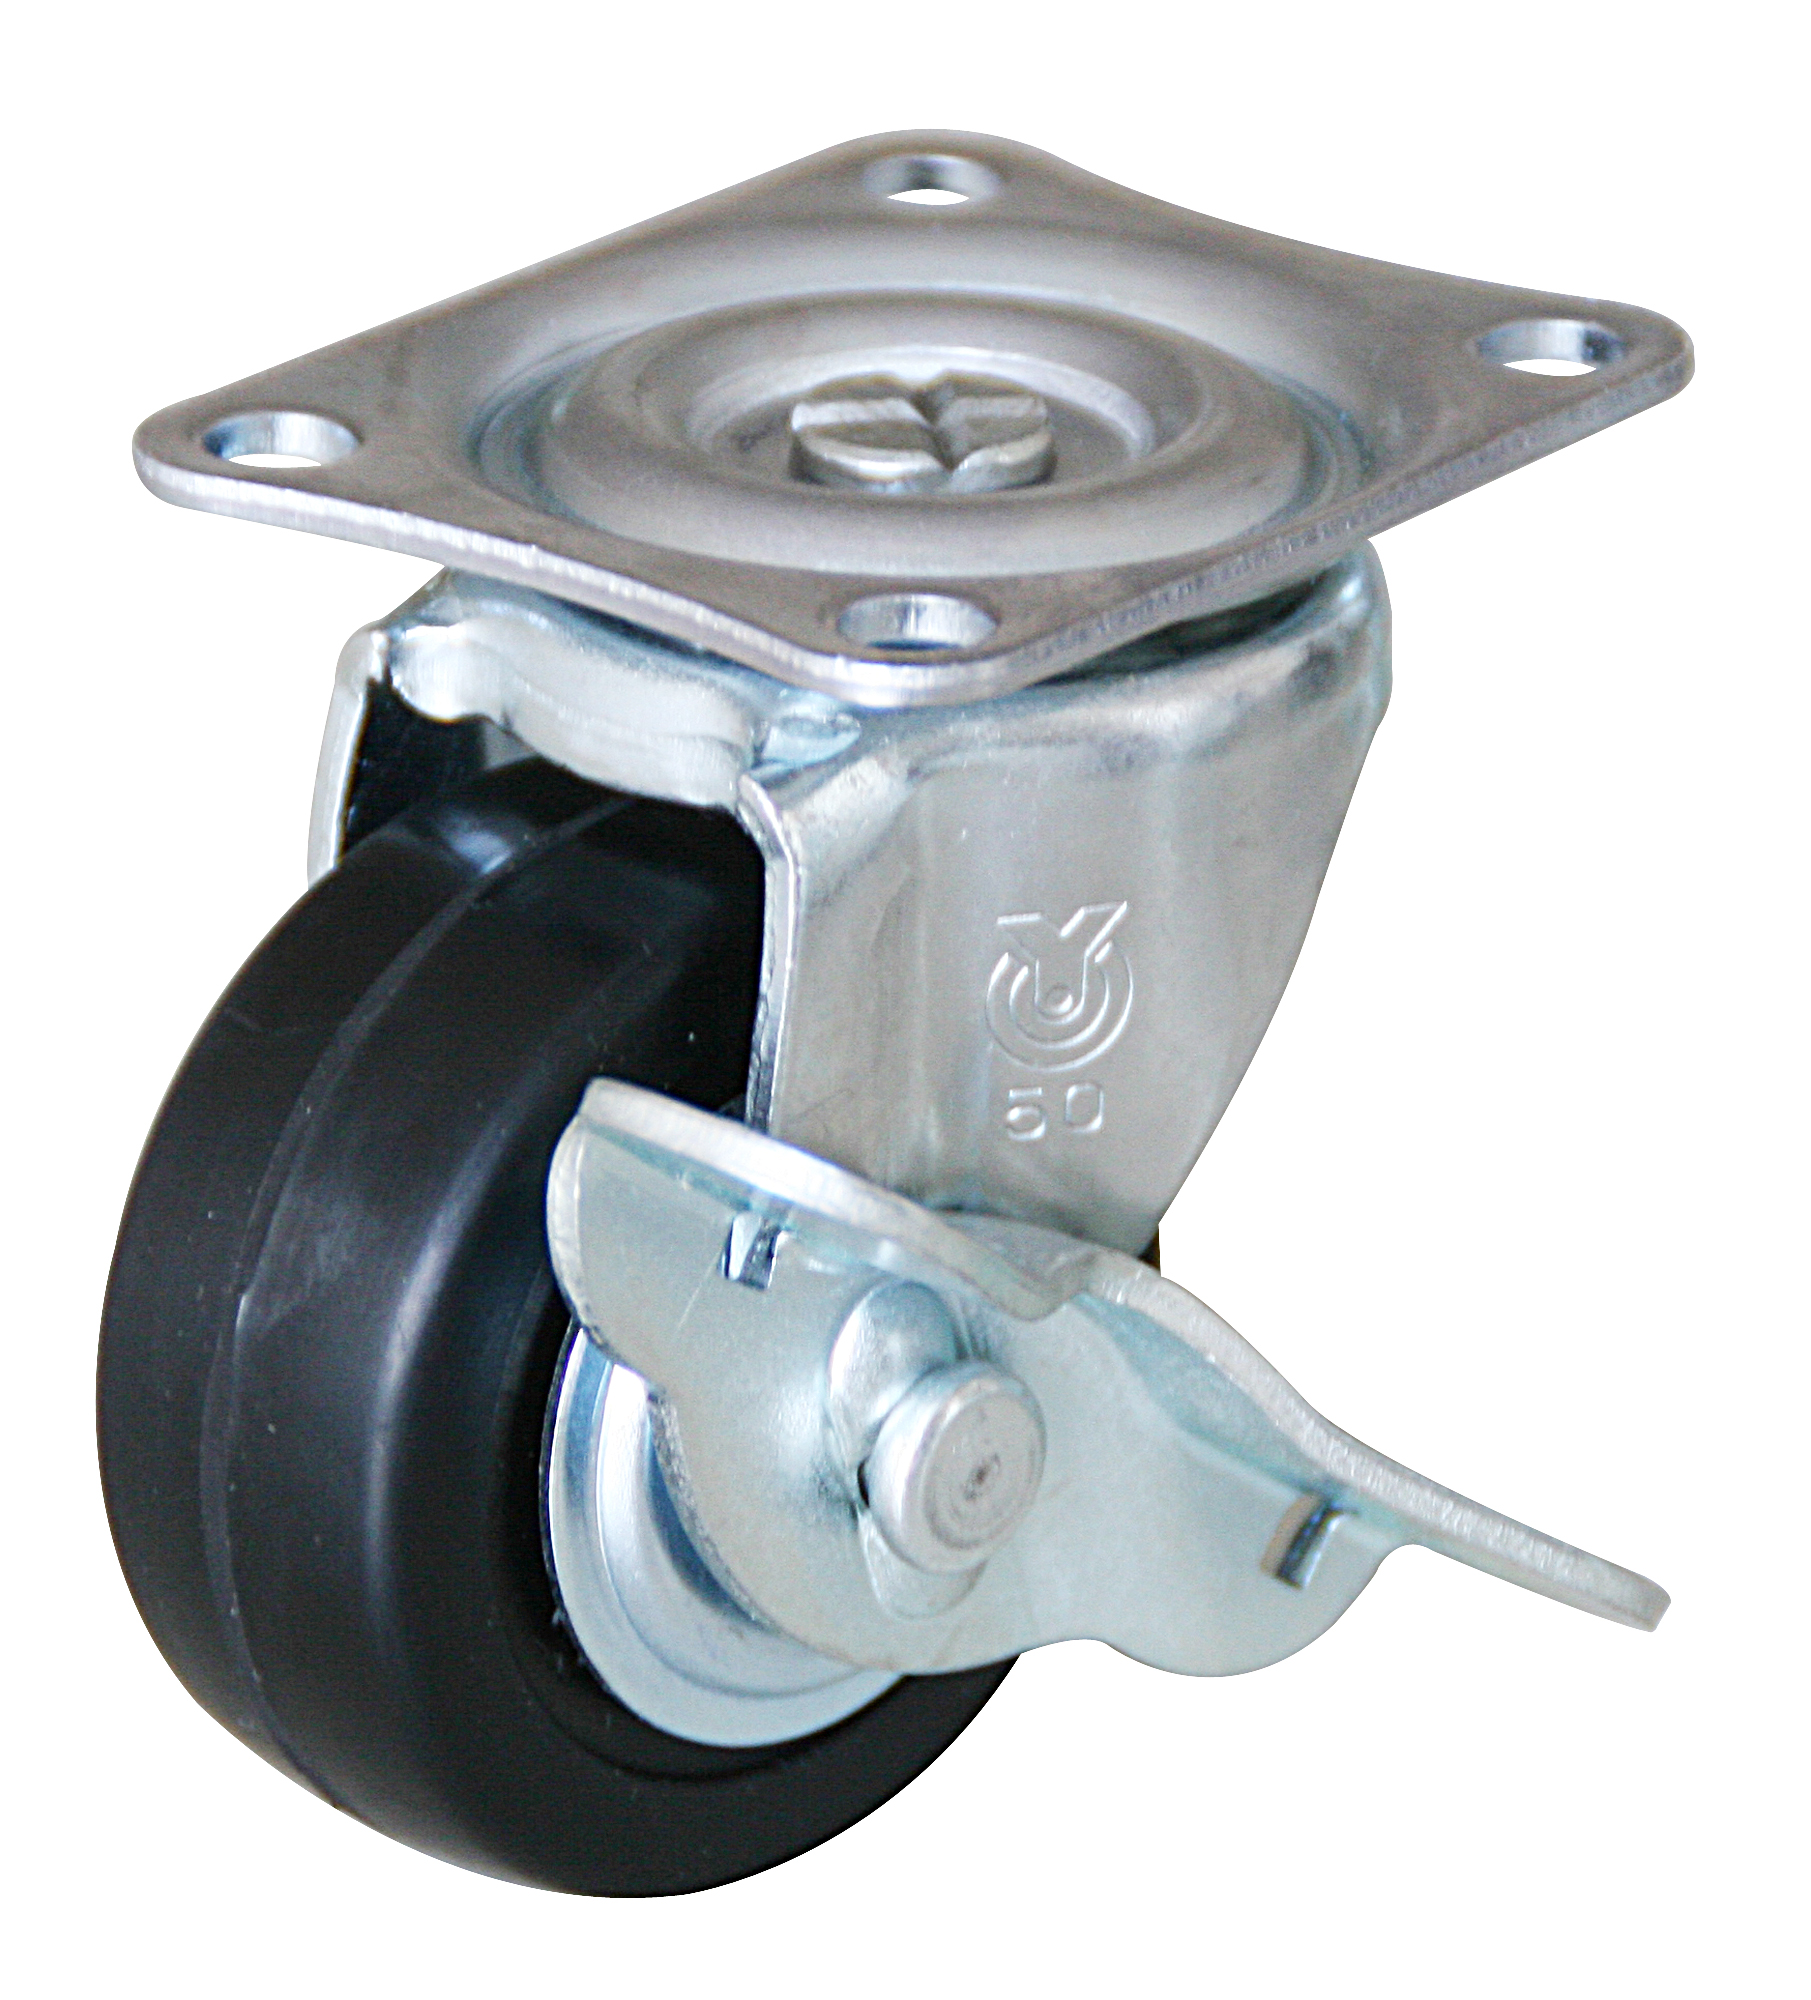 Casters - With swivel plate, G-S series.